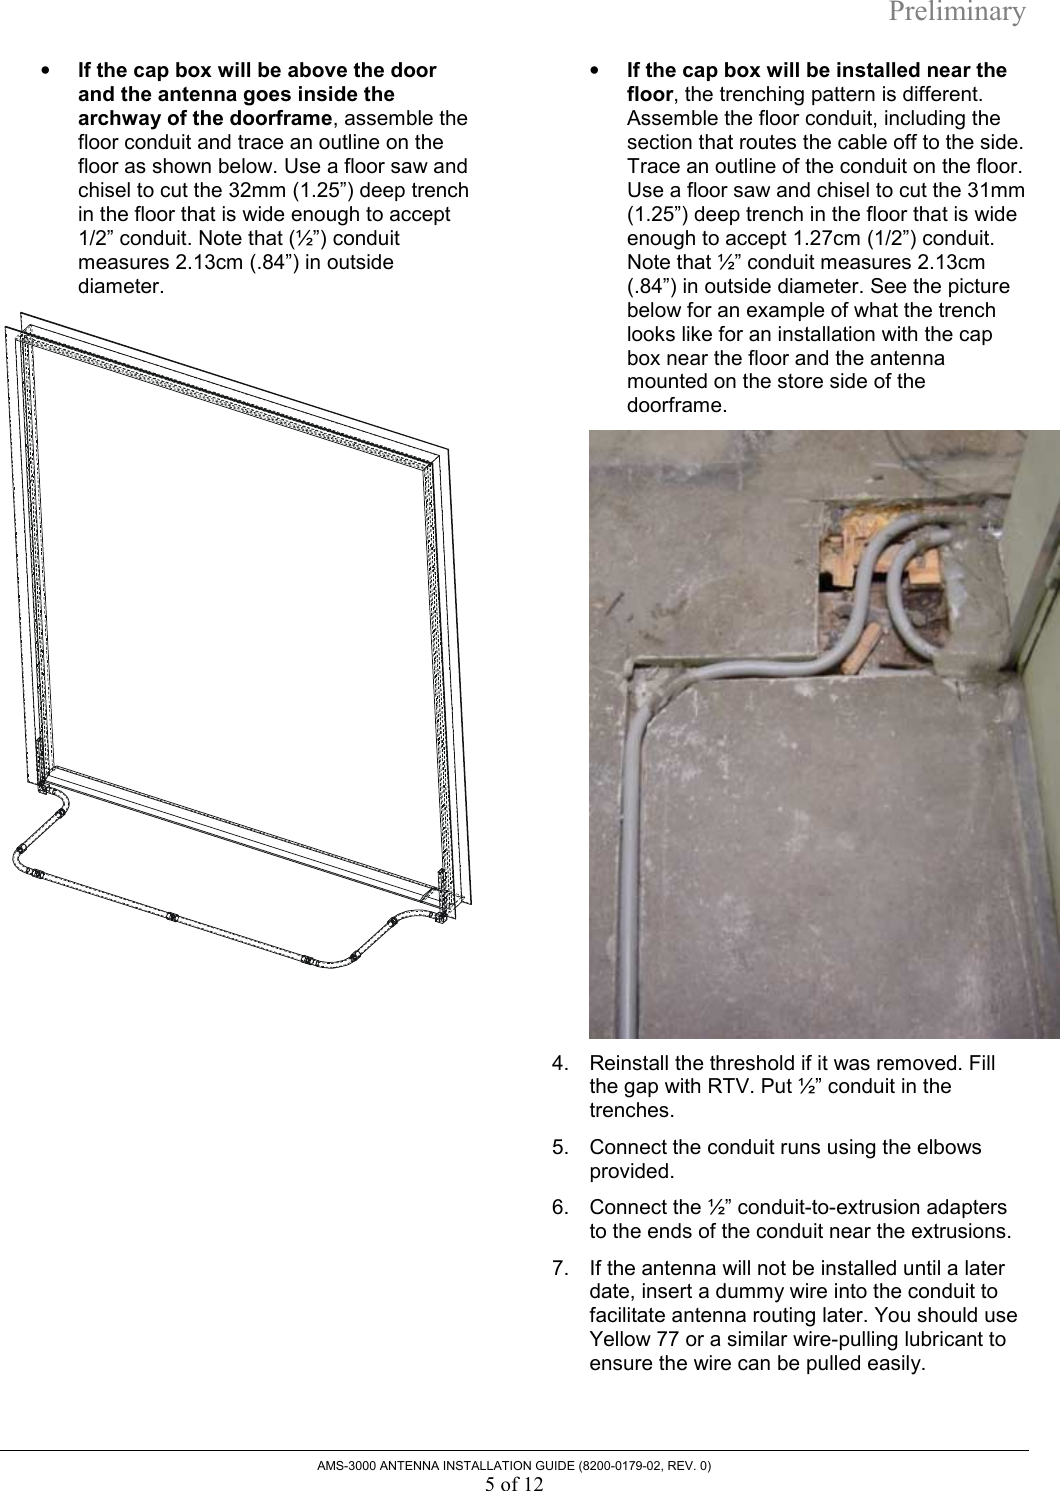 Preliminary AMS-3000 ANTENNA INSTALLATION GUIDE (8200-0179-02, REV. 0) 5 of 12 •  If the cap box will be above the door and the antenna goes inside the archway of the doorframe, assemble the floor conduit and trace an outline on the floor as shown below. Use a floor saw and chisel to cut the 32mm (1.25”) deep trench in the floor that is wide enough to accept 1/2” conduit. Note that (½”) conduit measures 2.13cm (.84”) in outside diameter.   •  If the cap box will be installed near the floor, the trenching pattern is different. Assemble the floor conduit, including the section that routes the cable off to the side. Trace an outline of the conduit on the floor. Use a floor saw and chisel to cut the 31mm (1.25”) deep trench in the floor that is wide enough to accept 1.27cm (1/2”) conduit. Note that ½” conduit measures 2.13cm (.84”) in outside diameter. See the picture below for an example of what the trench looks like for an installation with the cap box near the floor and the antenna mounted on the store side of the doorframe.   4.  Reinstall the threshold if it was removed. Fill the gap with RTV. Put ½” conduit in the trenches.  5.  Connect the conduit runs using the elbows provided. 6.  Connect the ½” conduit-to-extrusion adapters to the ends of the conduit near the extrusions. 7.  If the antenna will not be installed until a later date, insert a dummy wire into the conduit to facilitate antenna routing later. You should use Yellow 77 or a similar wire-pulling lubricant to ensure the wire can be pulled easily.  